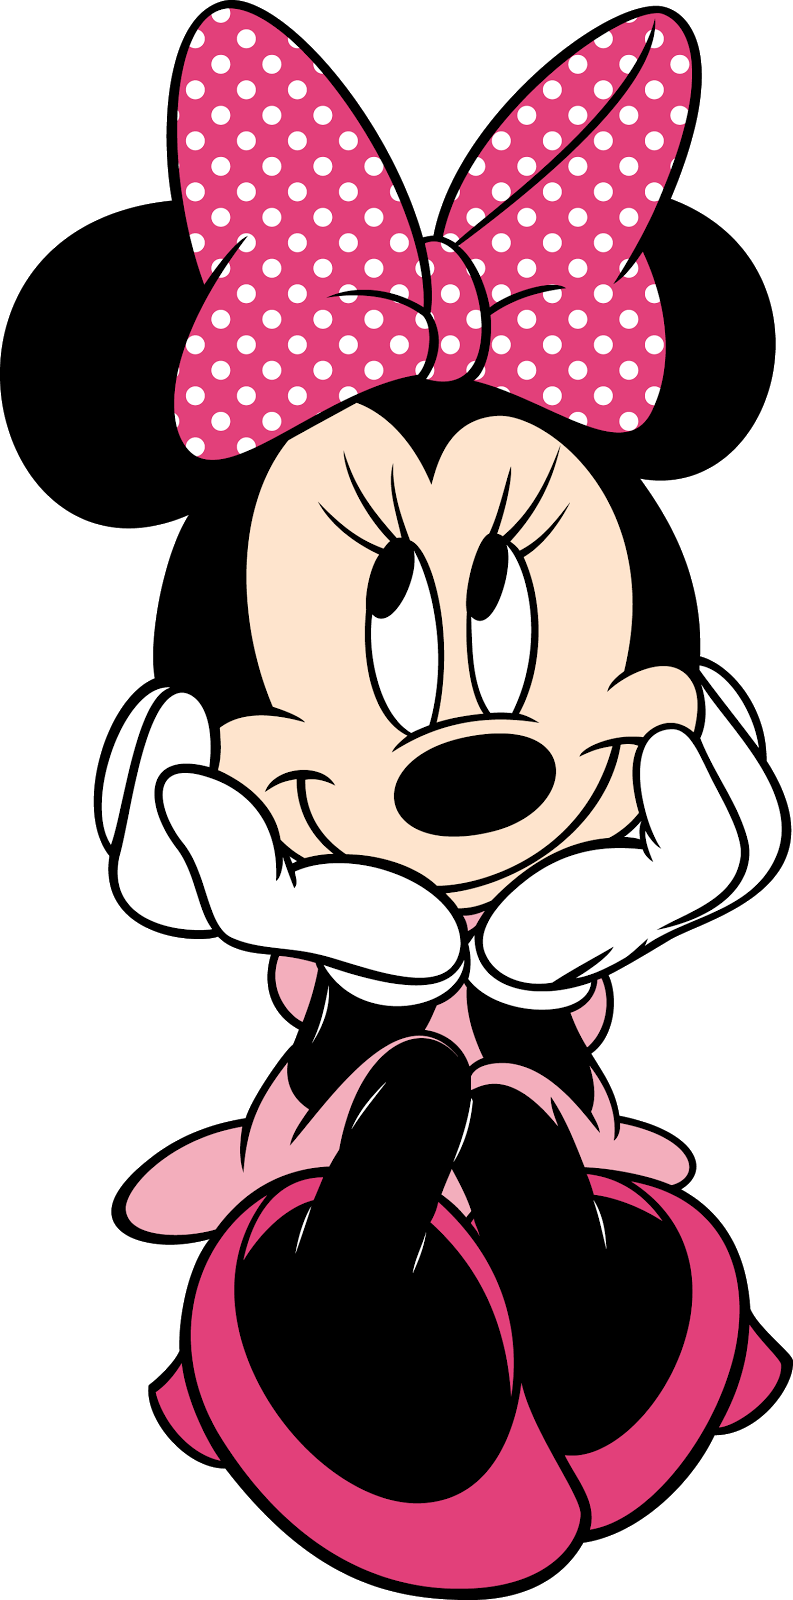 Baby Minnie Mouse Clip Art Png   Clipart Panda   Free Clipart Images